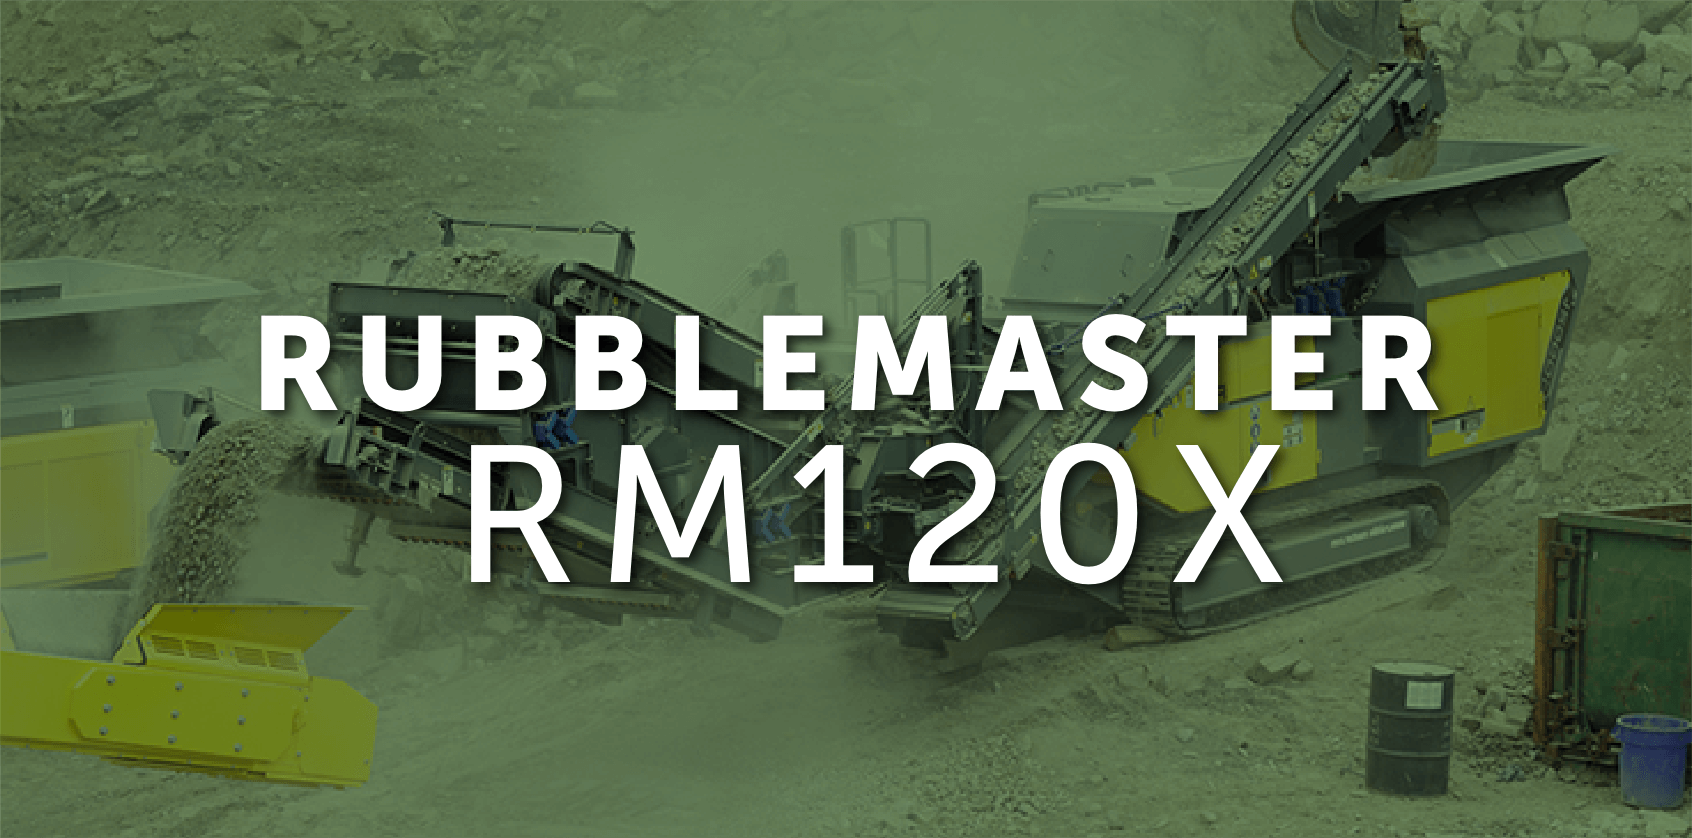 rubbermaster-rm120x